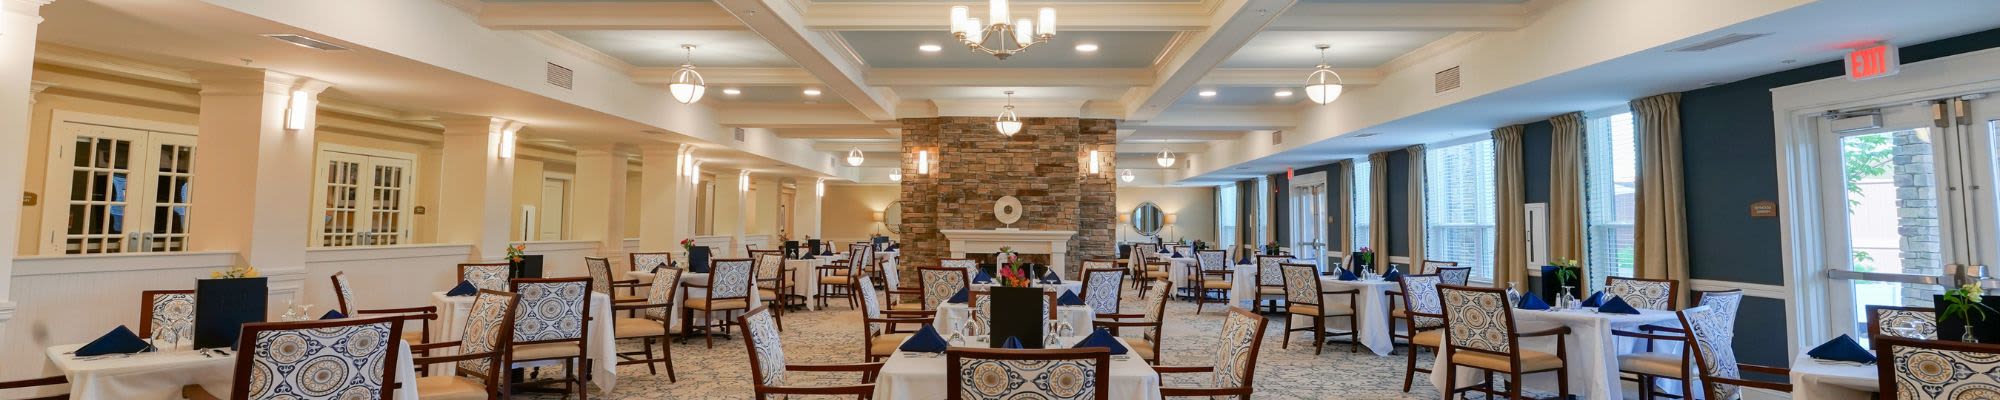 Dining at Harmony at White Oaks in Bridgeport, West Virginia